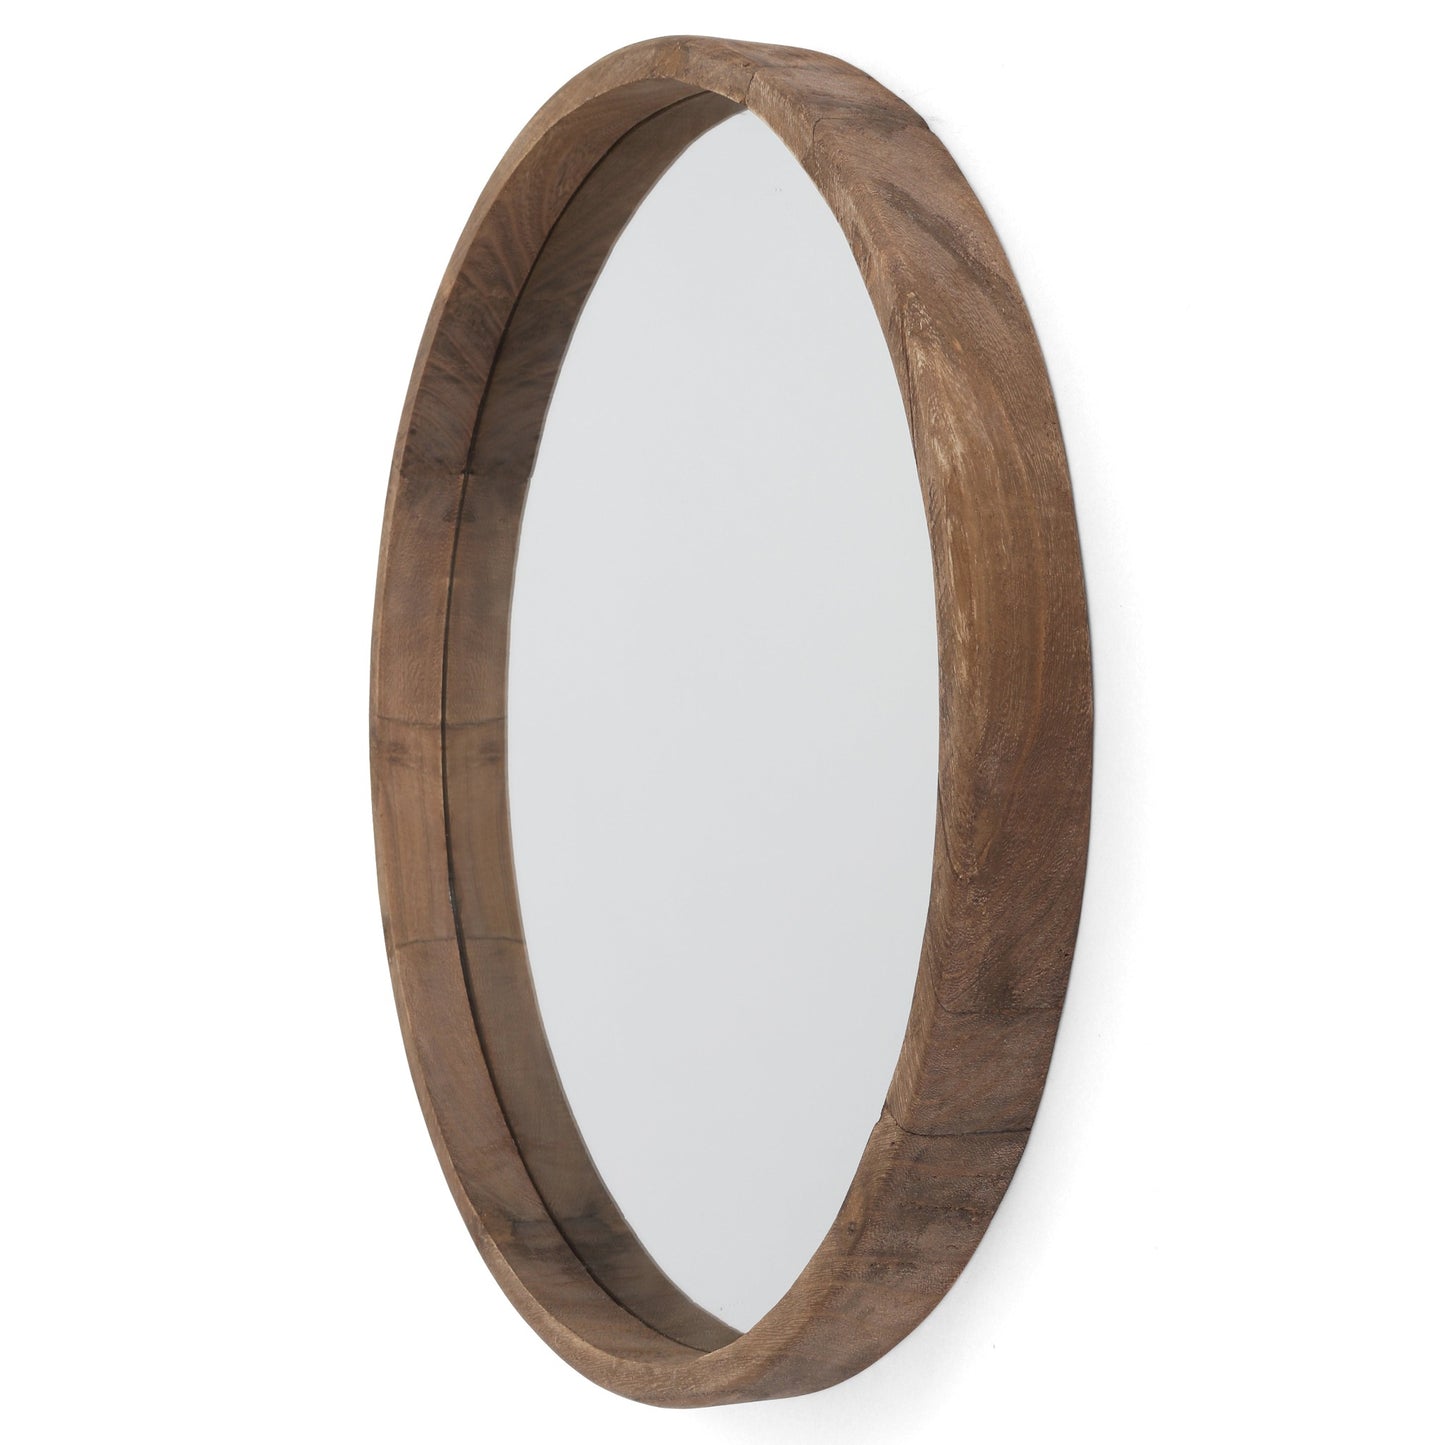 Midwood Wooden Mirror - Large